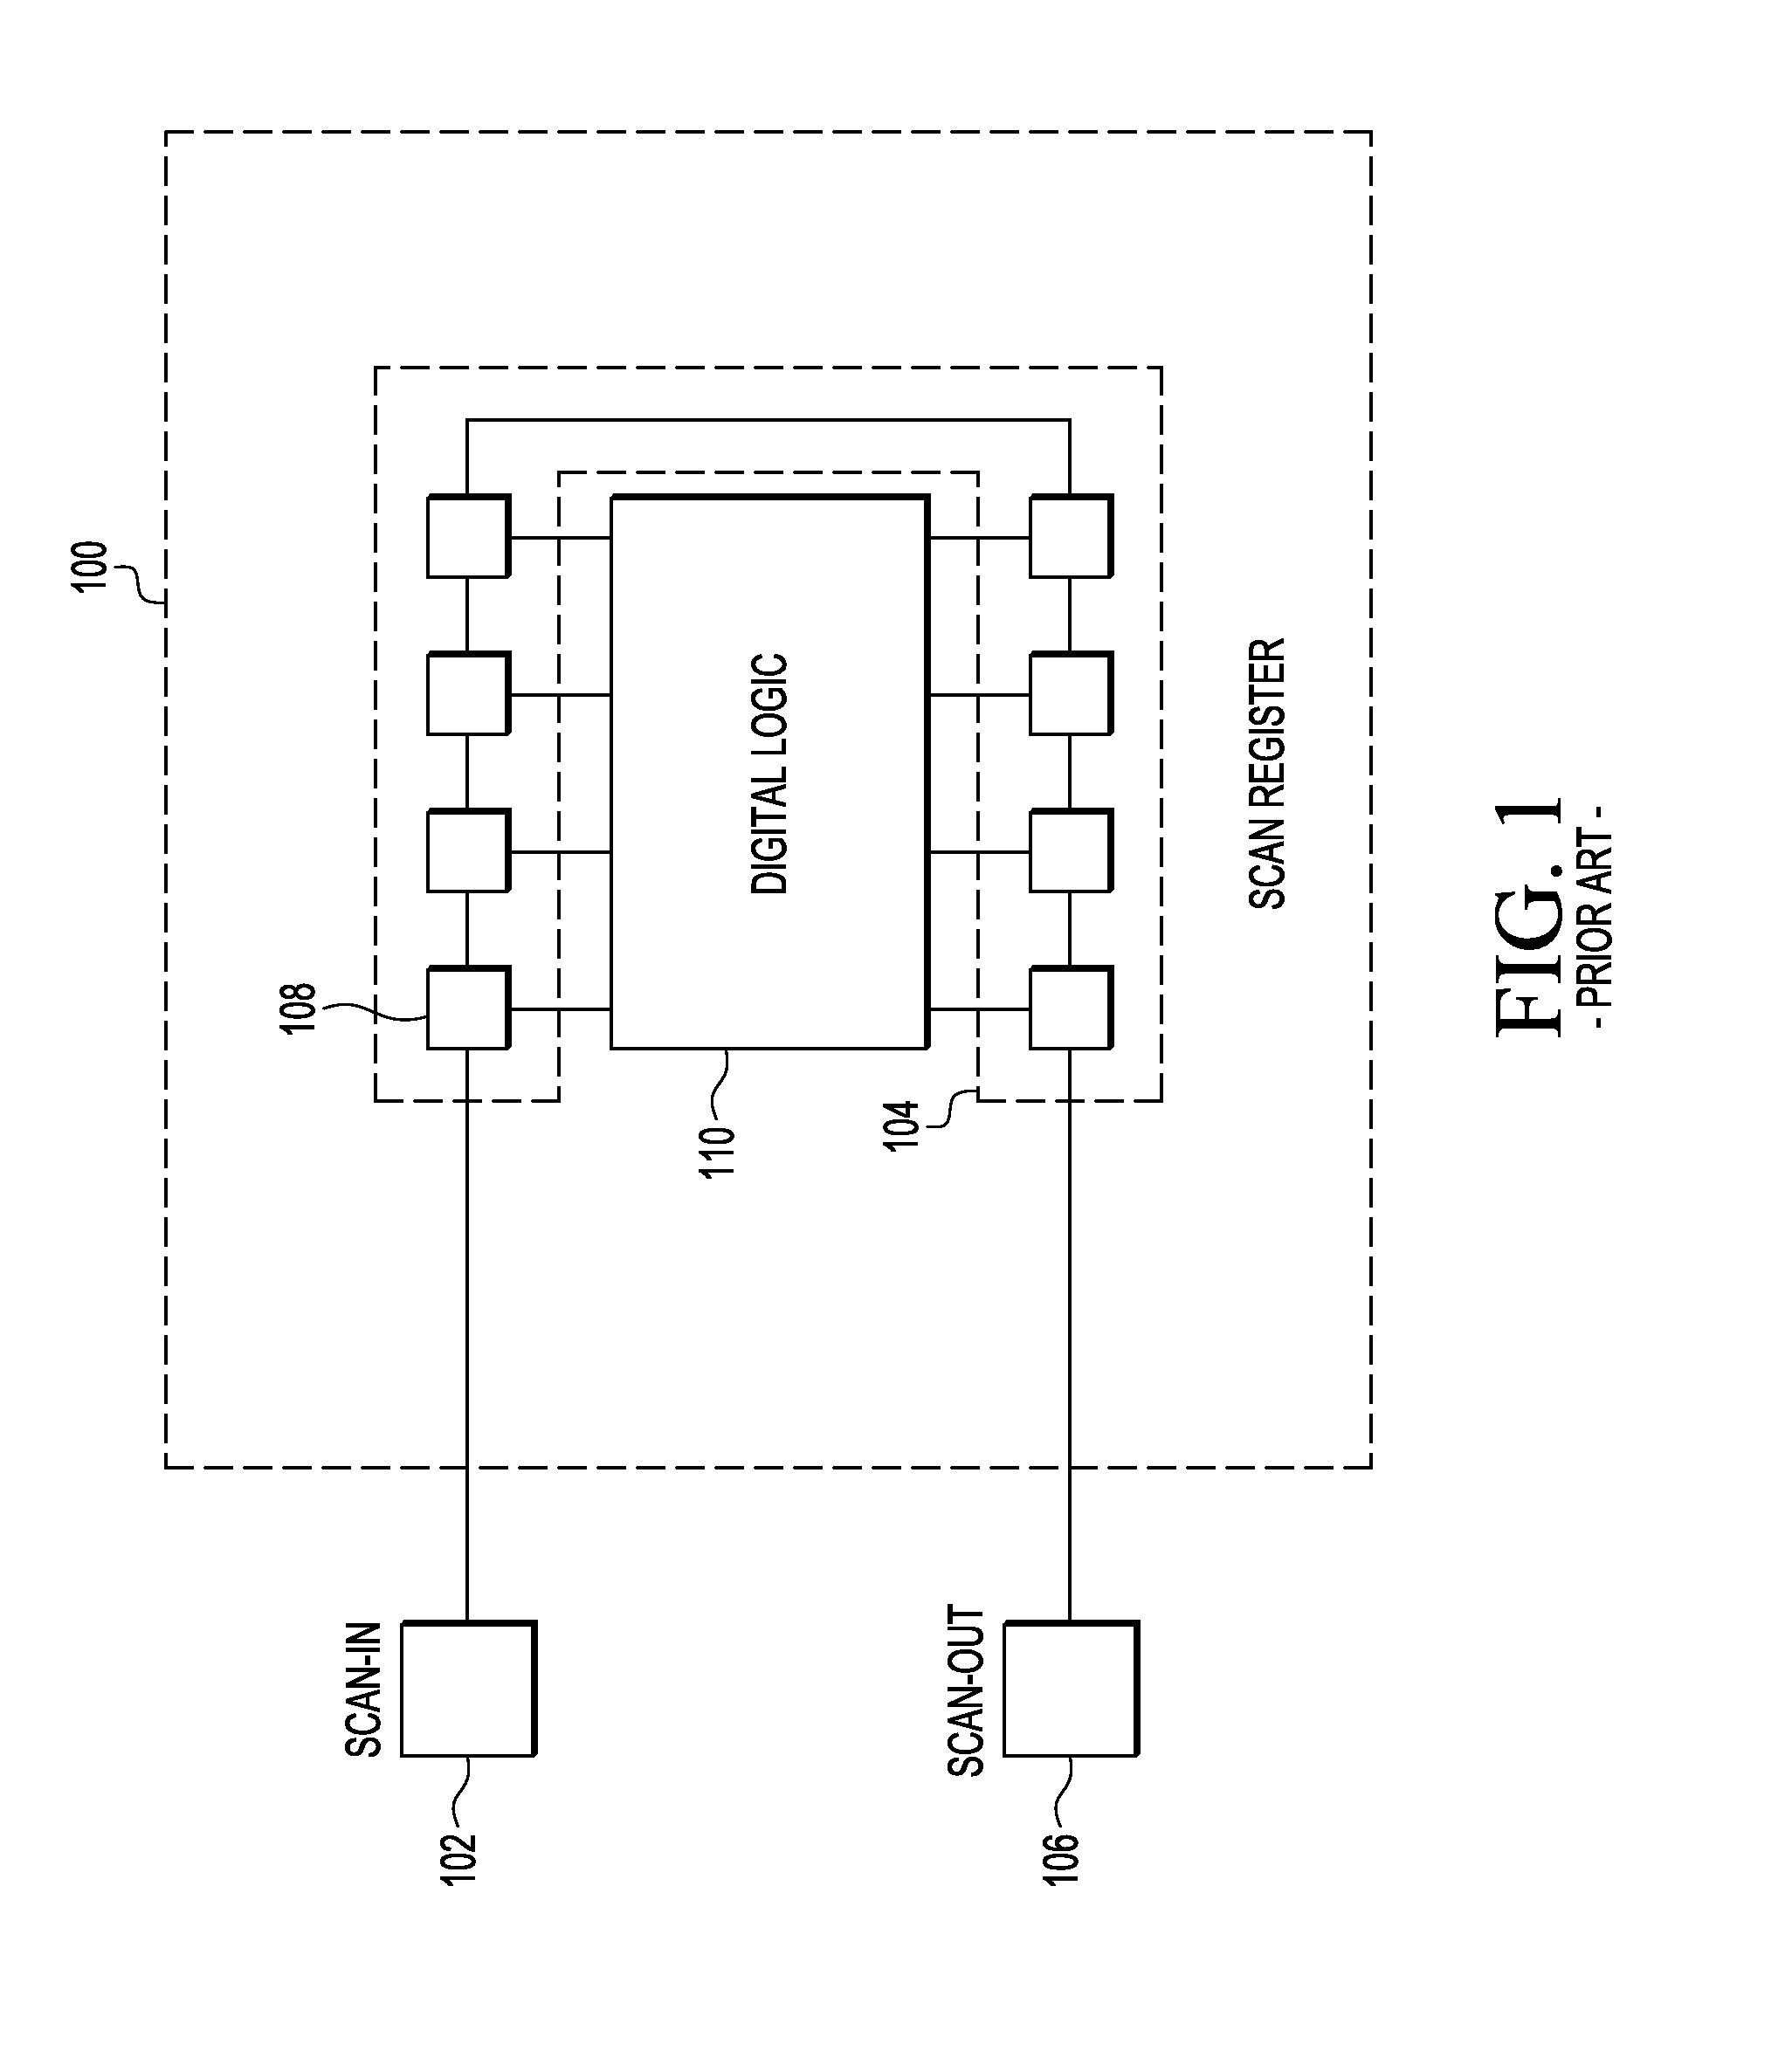 System and method for scan testing integrated circuits